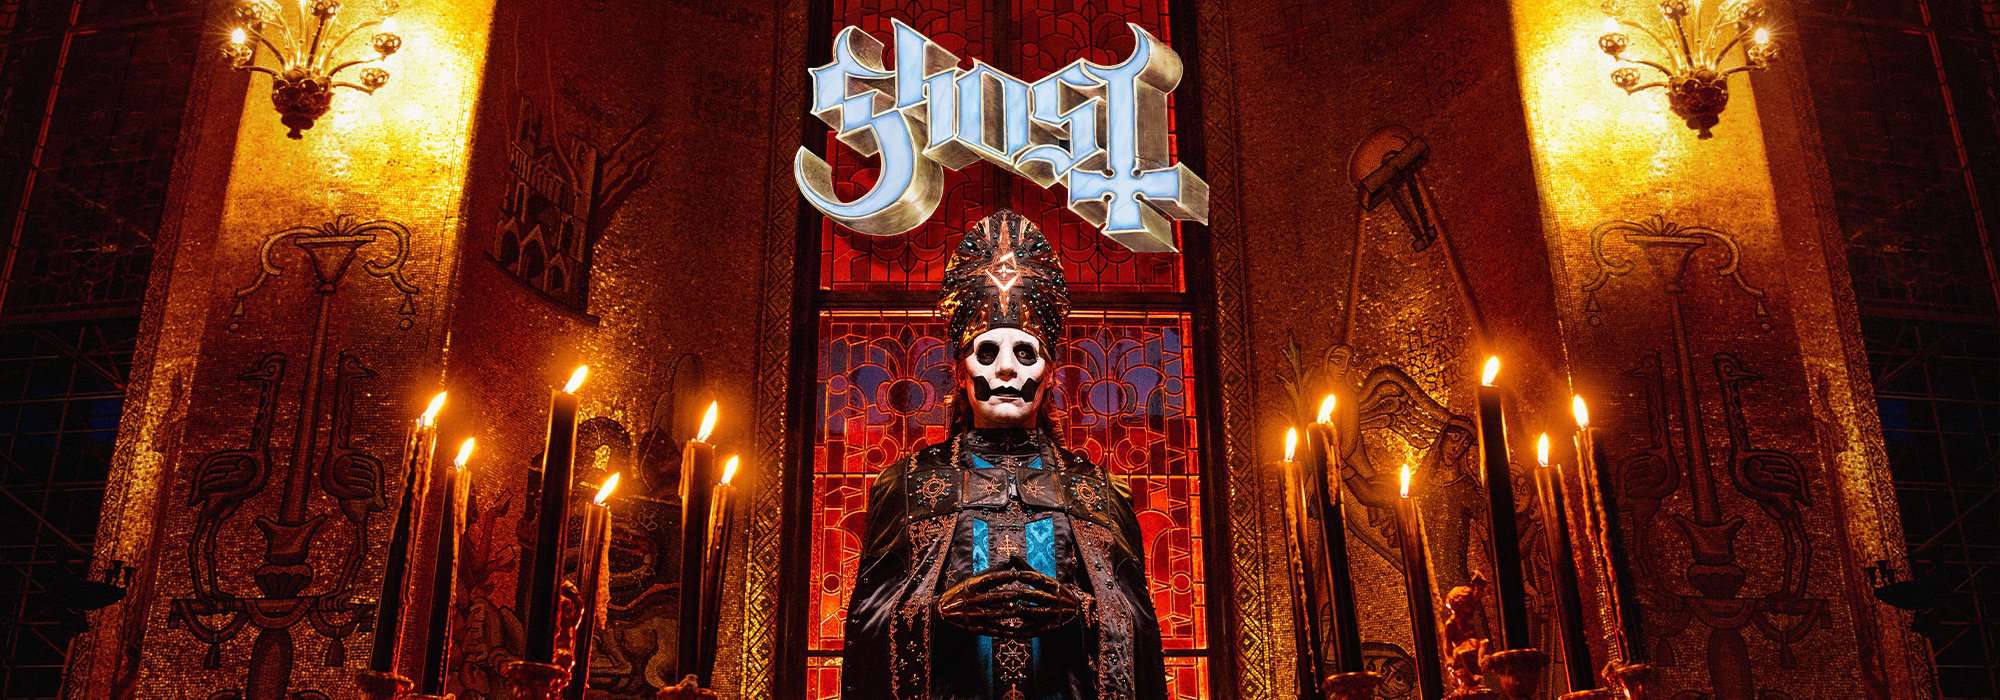 GHOST Haunts The Place Bell, Quebec (Concert Blog)